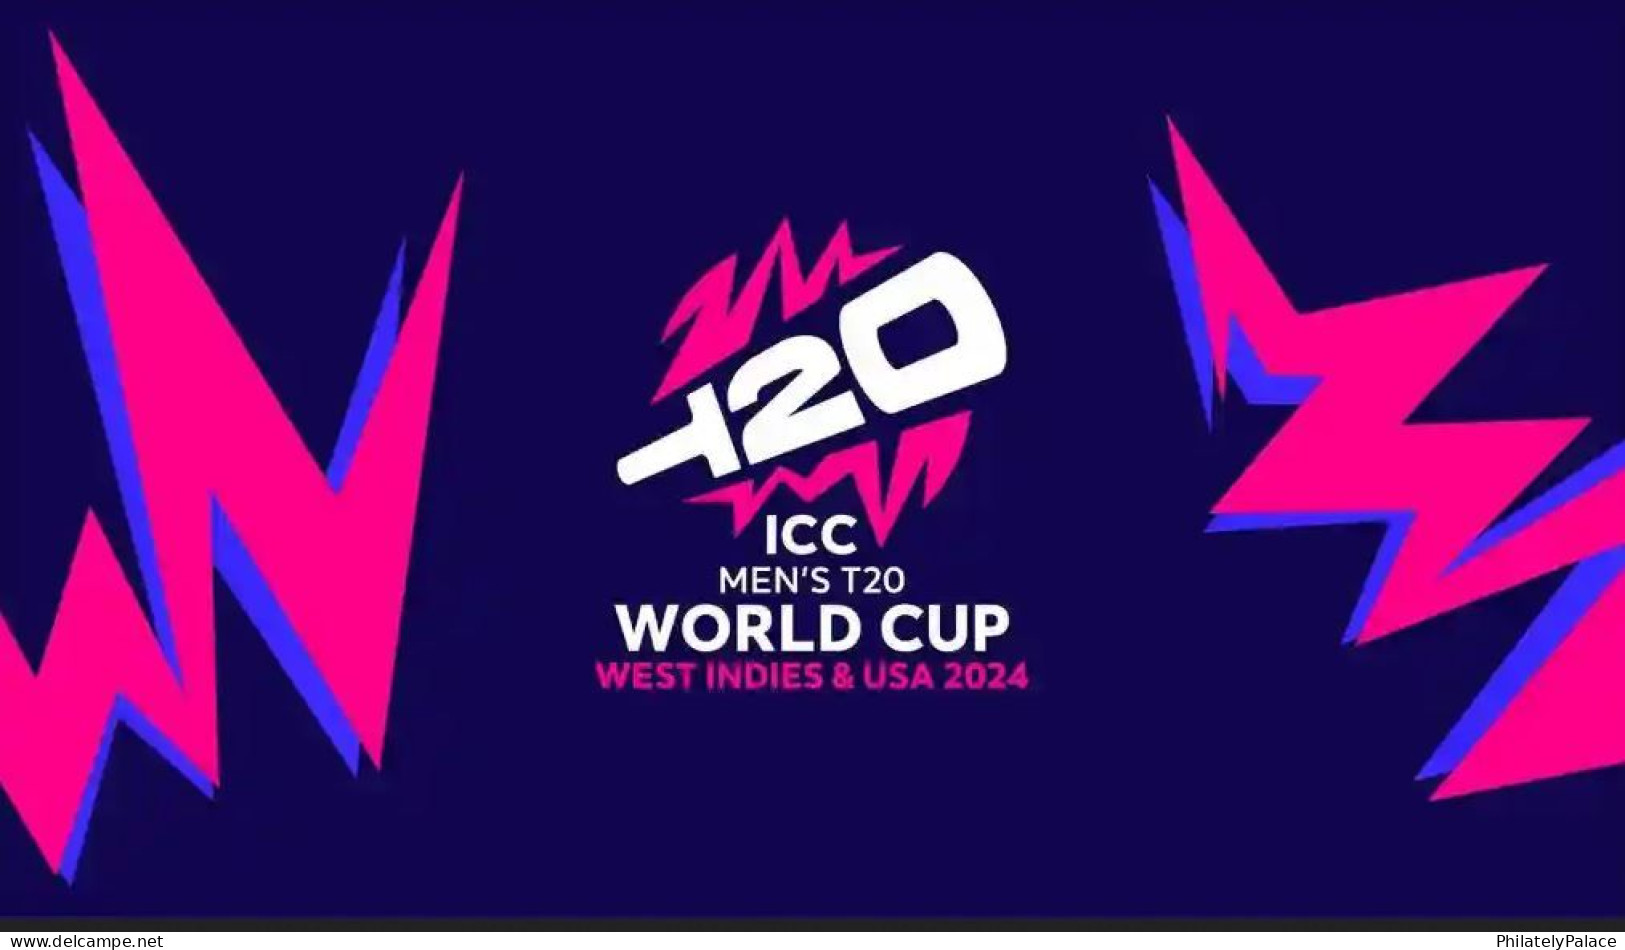 India 2024 ICC Men's T20 World Cup, Cricket, Games, India Vs South Africa, USA,West Indies,Venue,Sp Cover(**)Inde Indien - Storia Postale